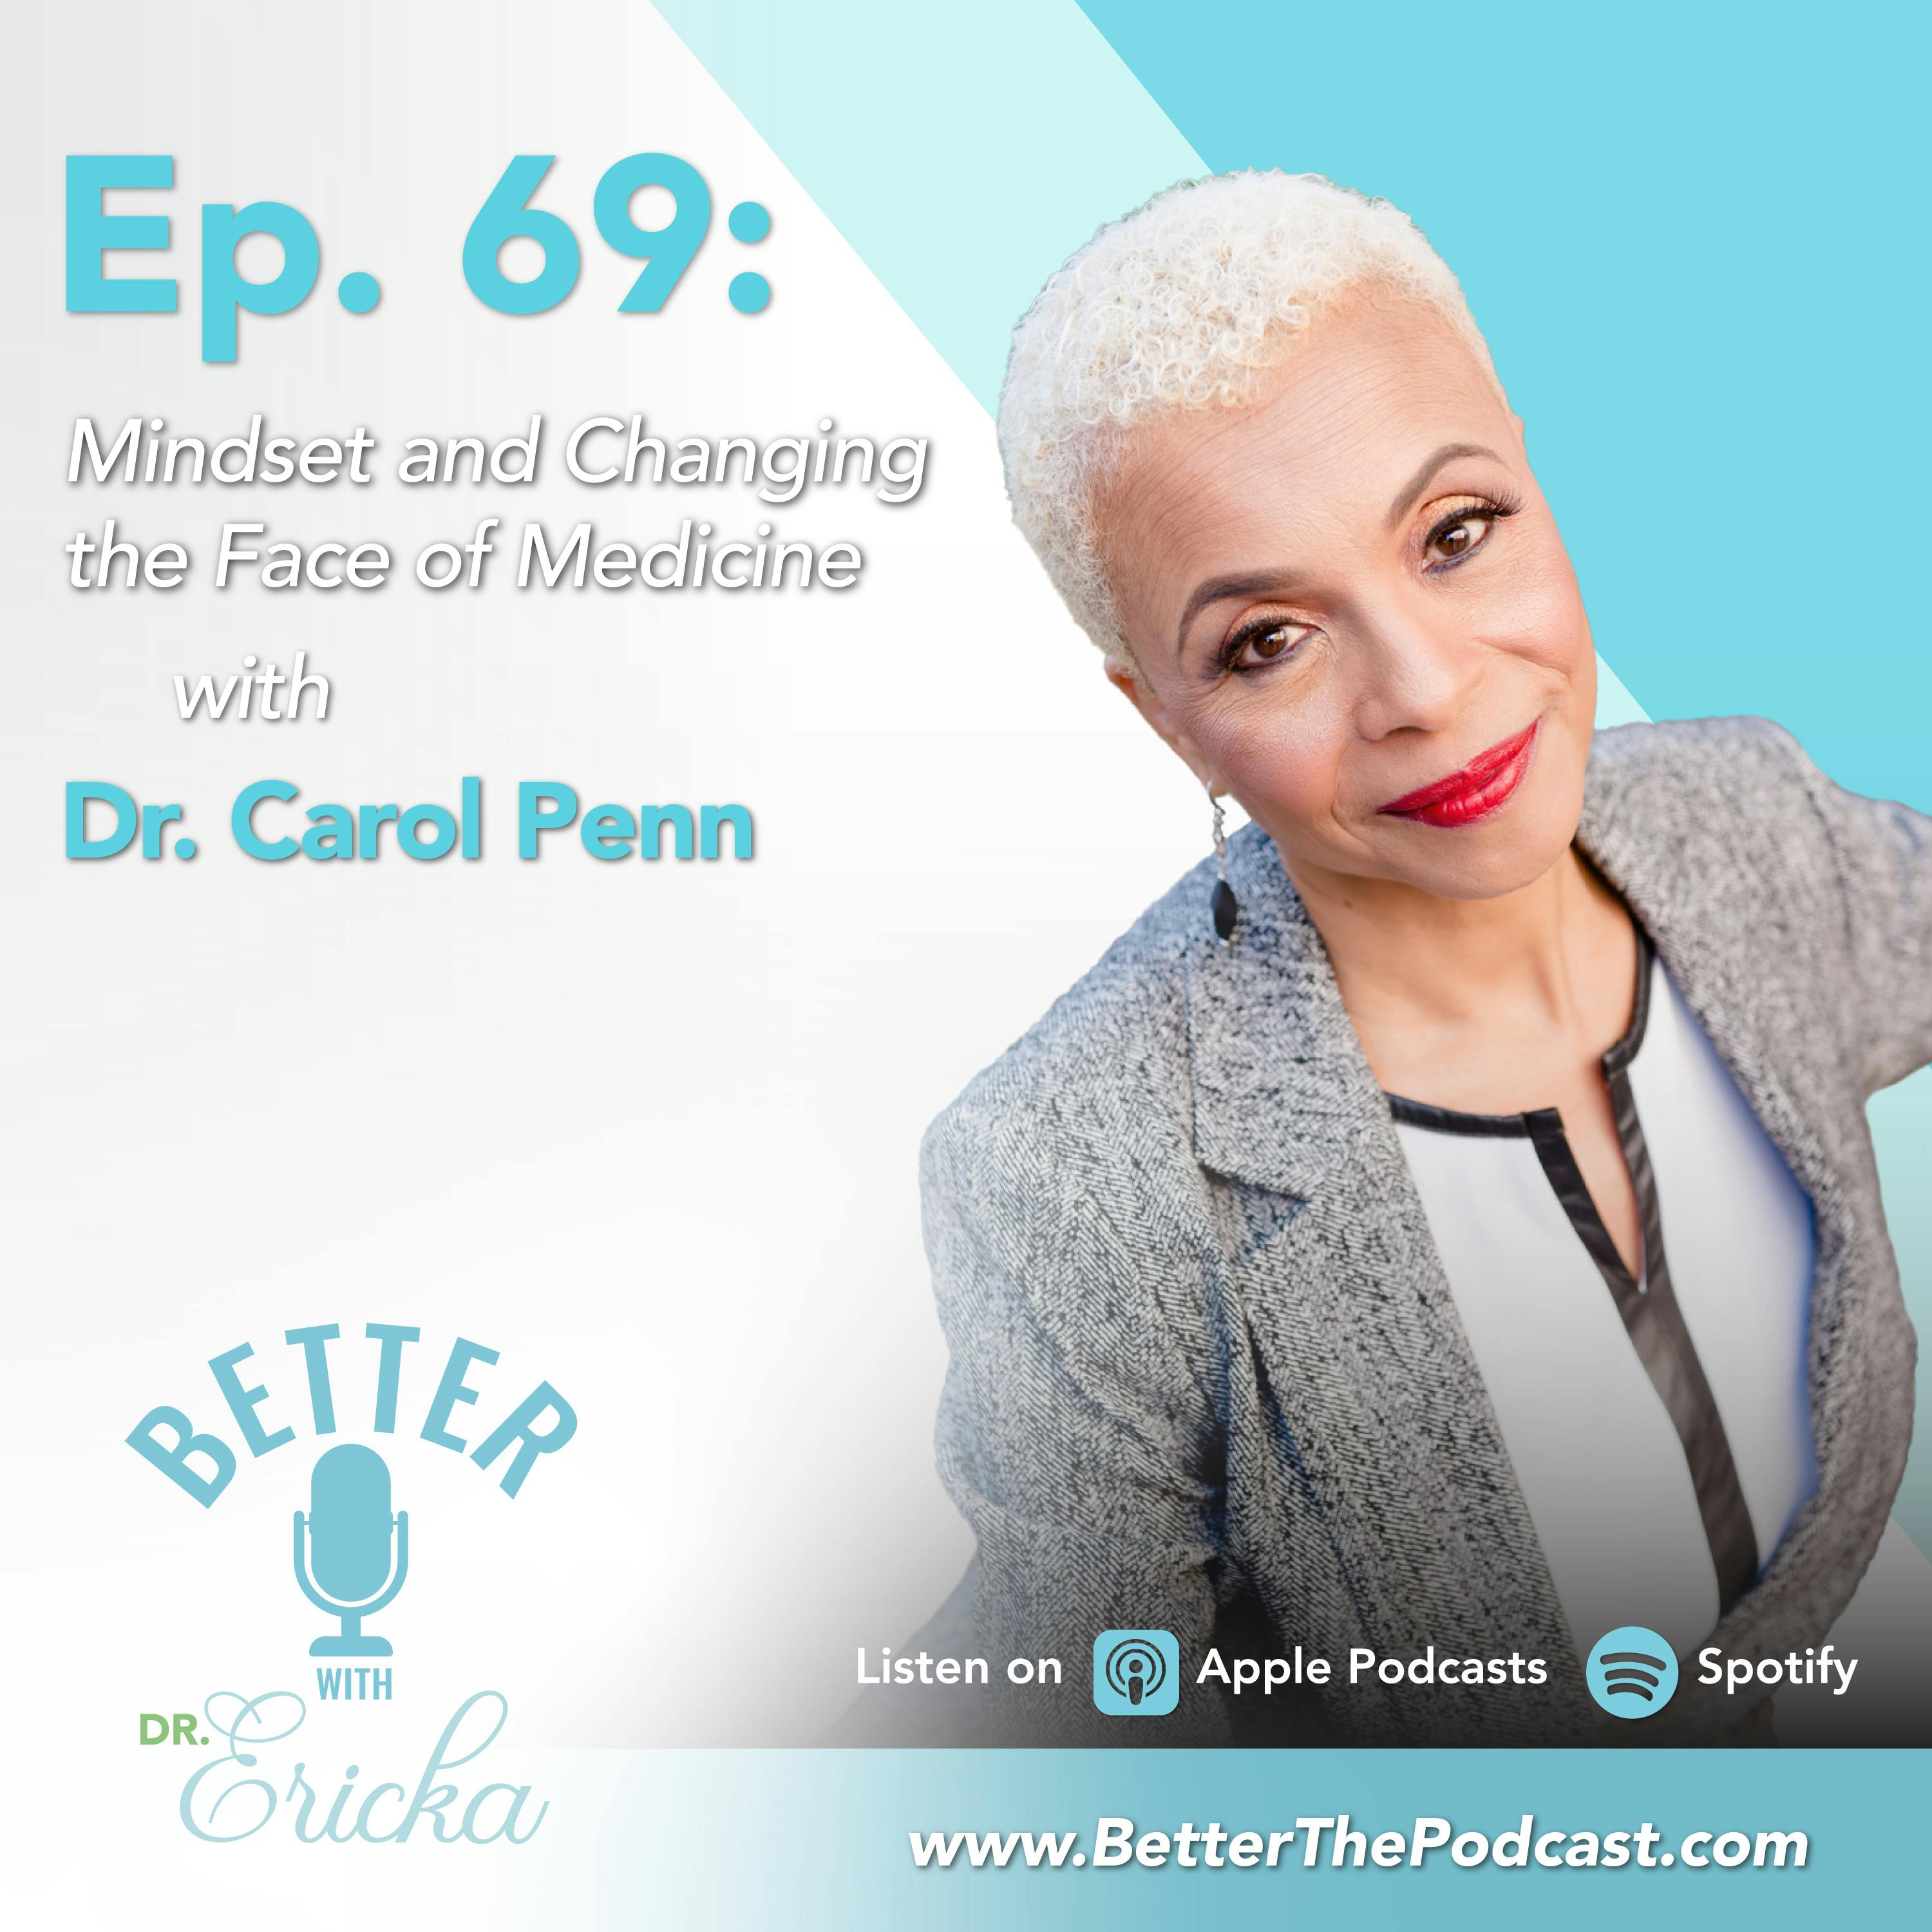 Mindset and Changing the Face of Medicine with Dr. Carol Penn